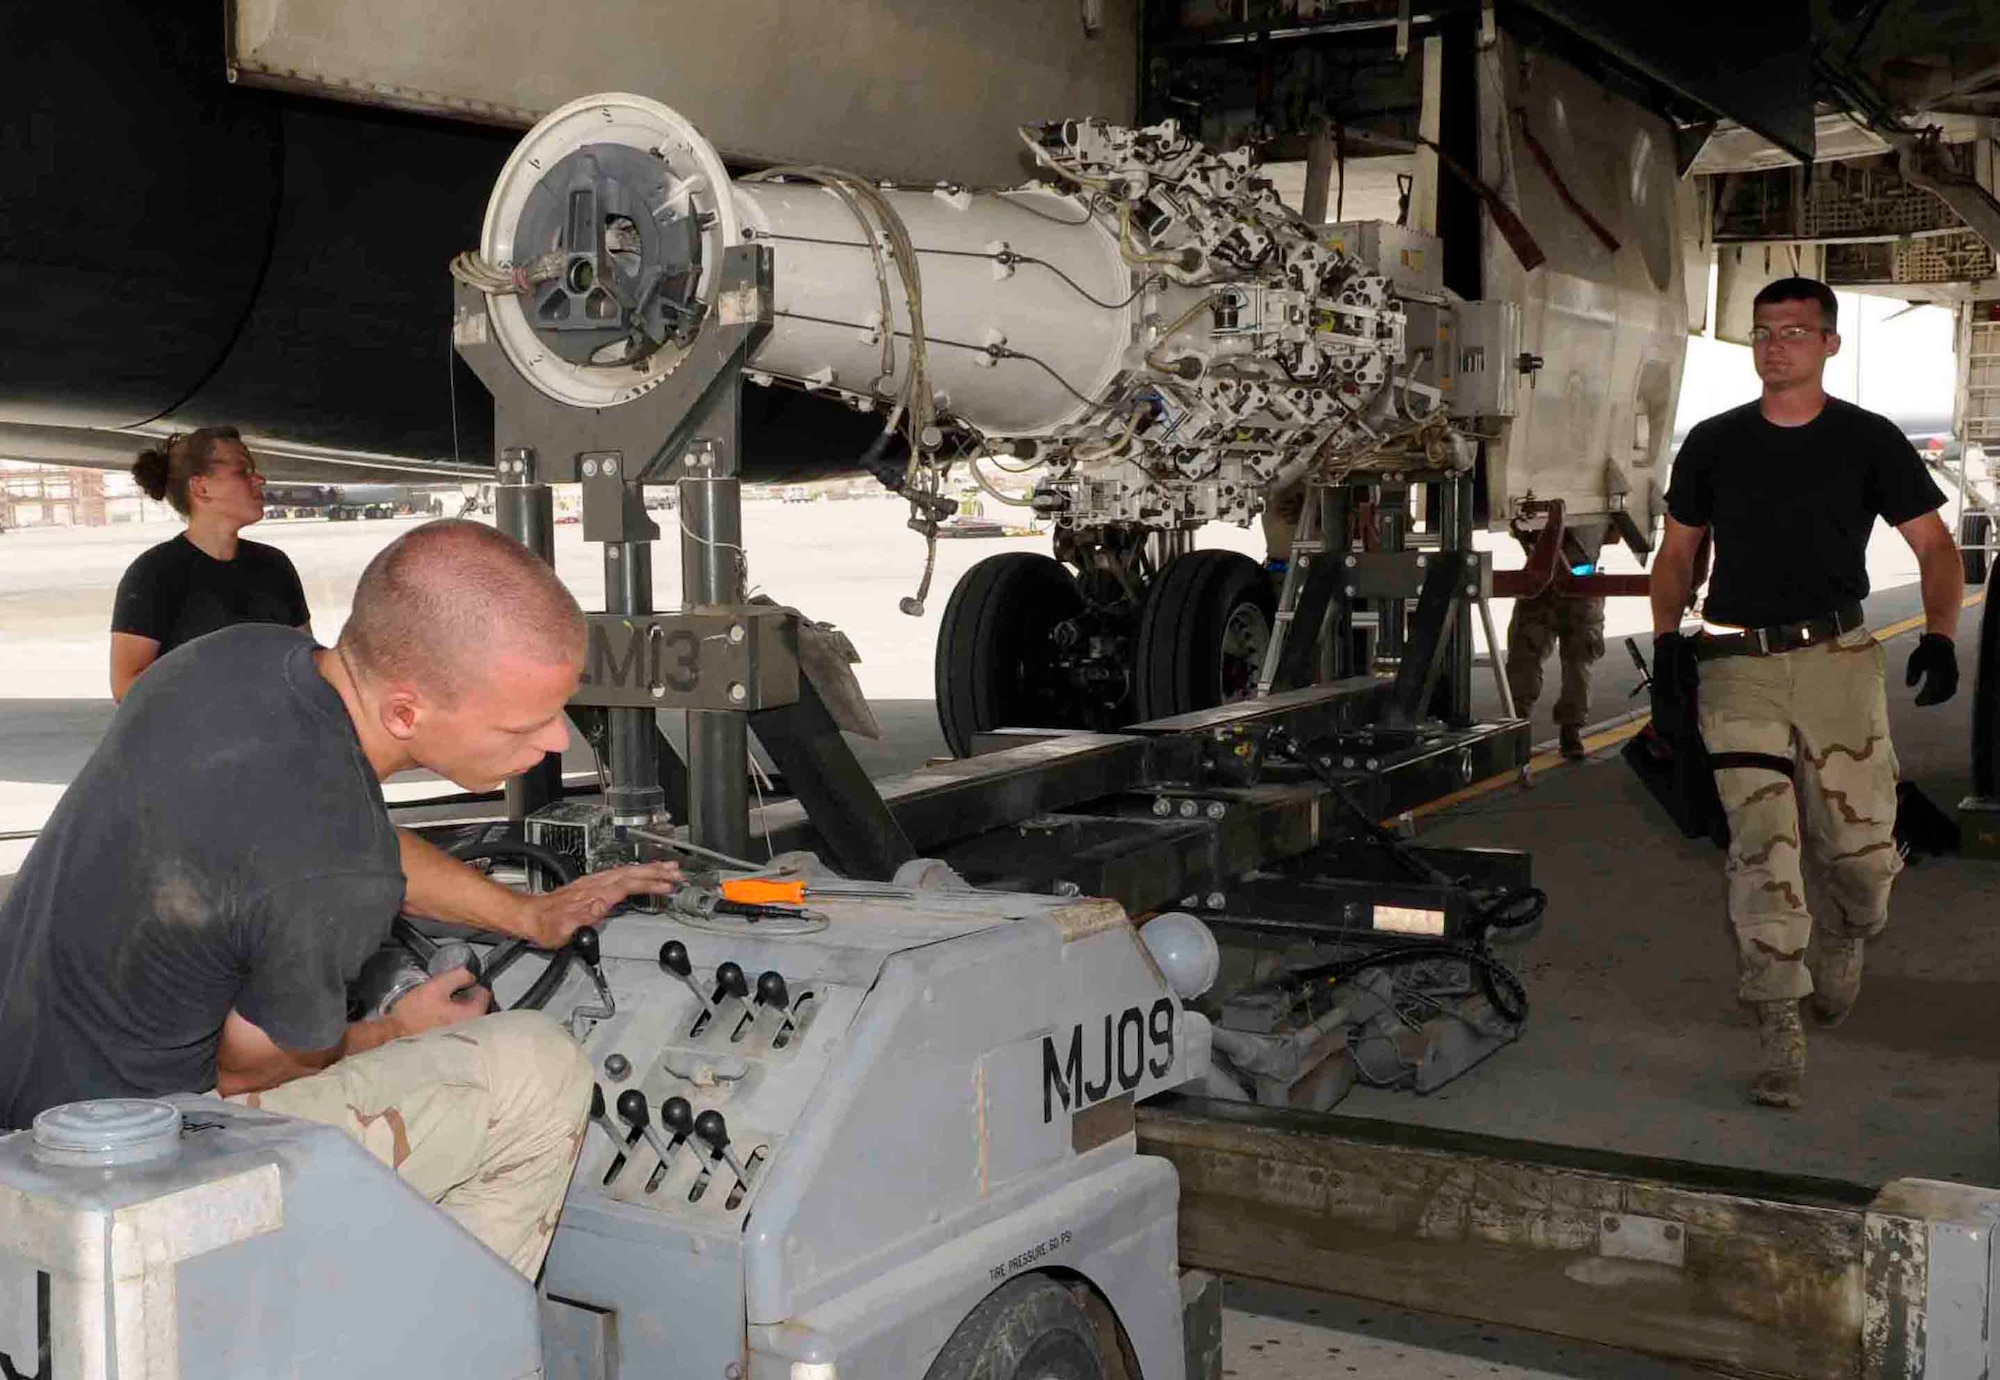 Airman 1st Class Thomas Howe operates a MJ-40 bomb lift truck while Staff Sgt. Jacob Sherwood guides him into position to install a 2,000-pound conventional rotary launcher in the aft weapons bay of a B-1 Lancer at a Southwest Asia air base May 7. They are assigned with 379th Expeditionary Aircraft Maintenance Squadron and deployed from Ellsworth Air Force Base, S.D. (Tech. Sgt. Johnny Saldivar)